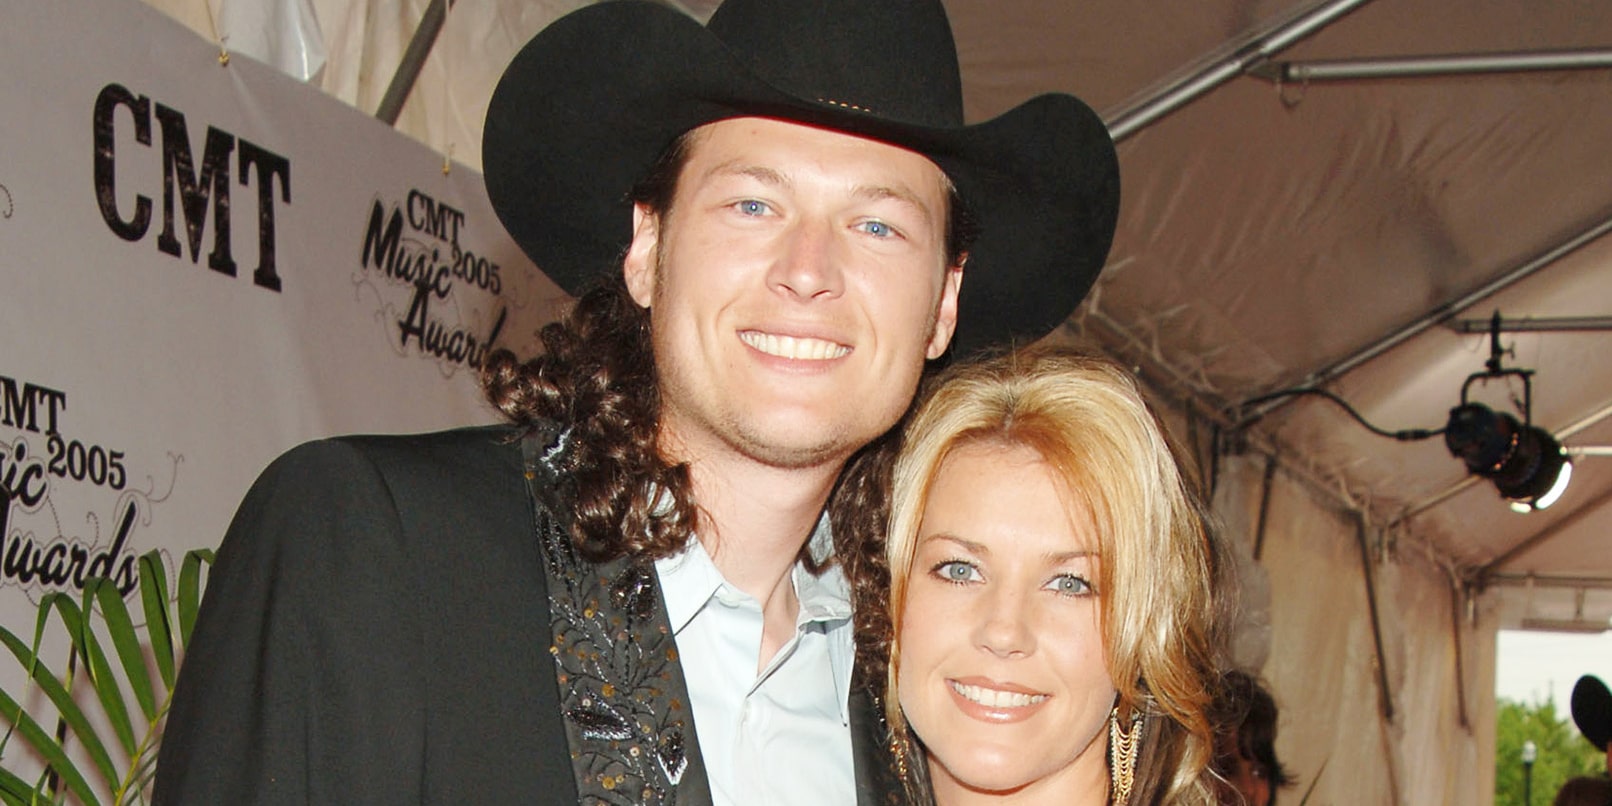 How rich is Blake Shelton's ex-wife